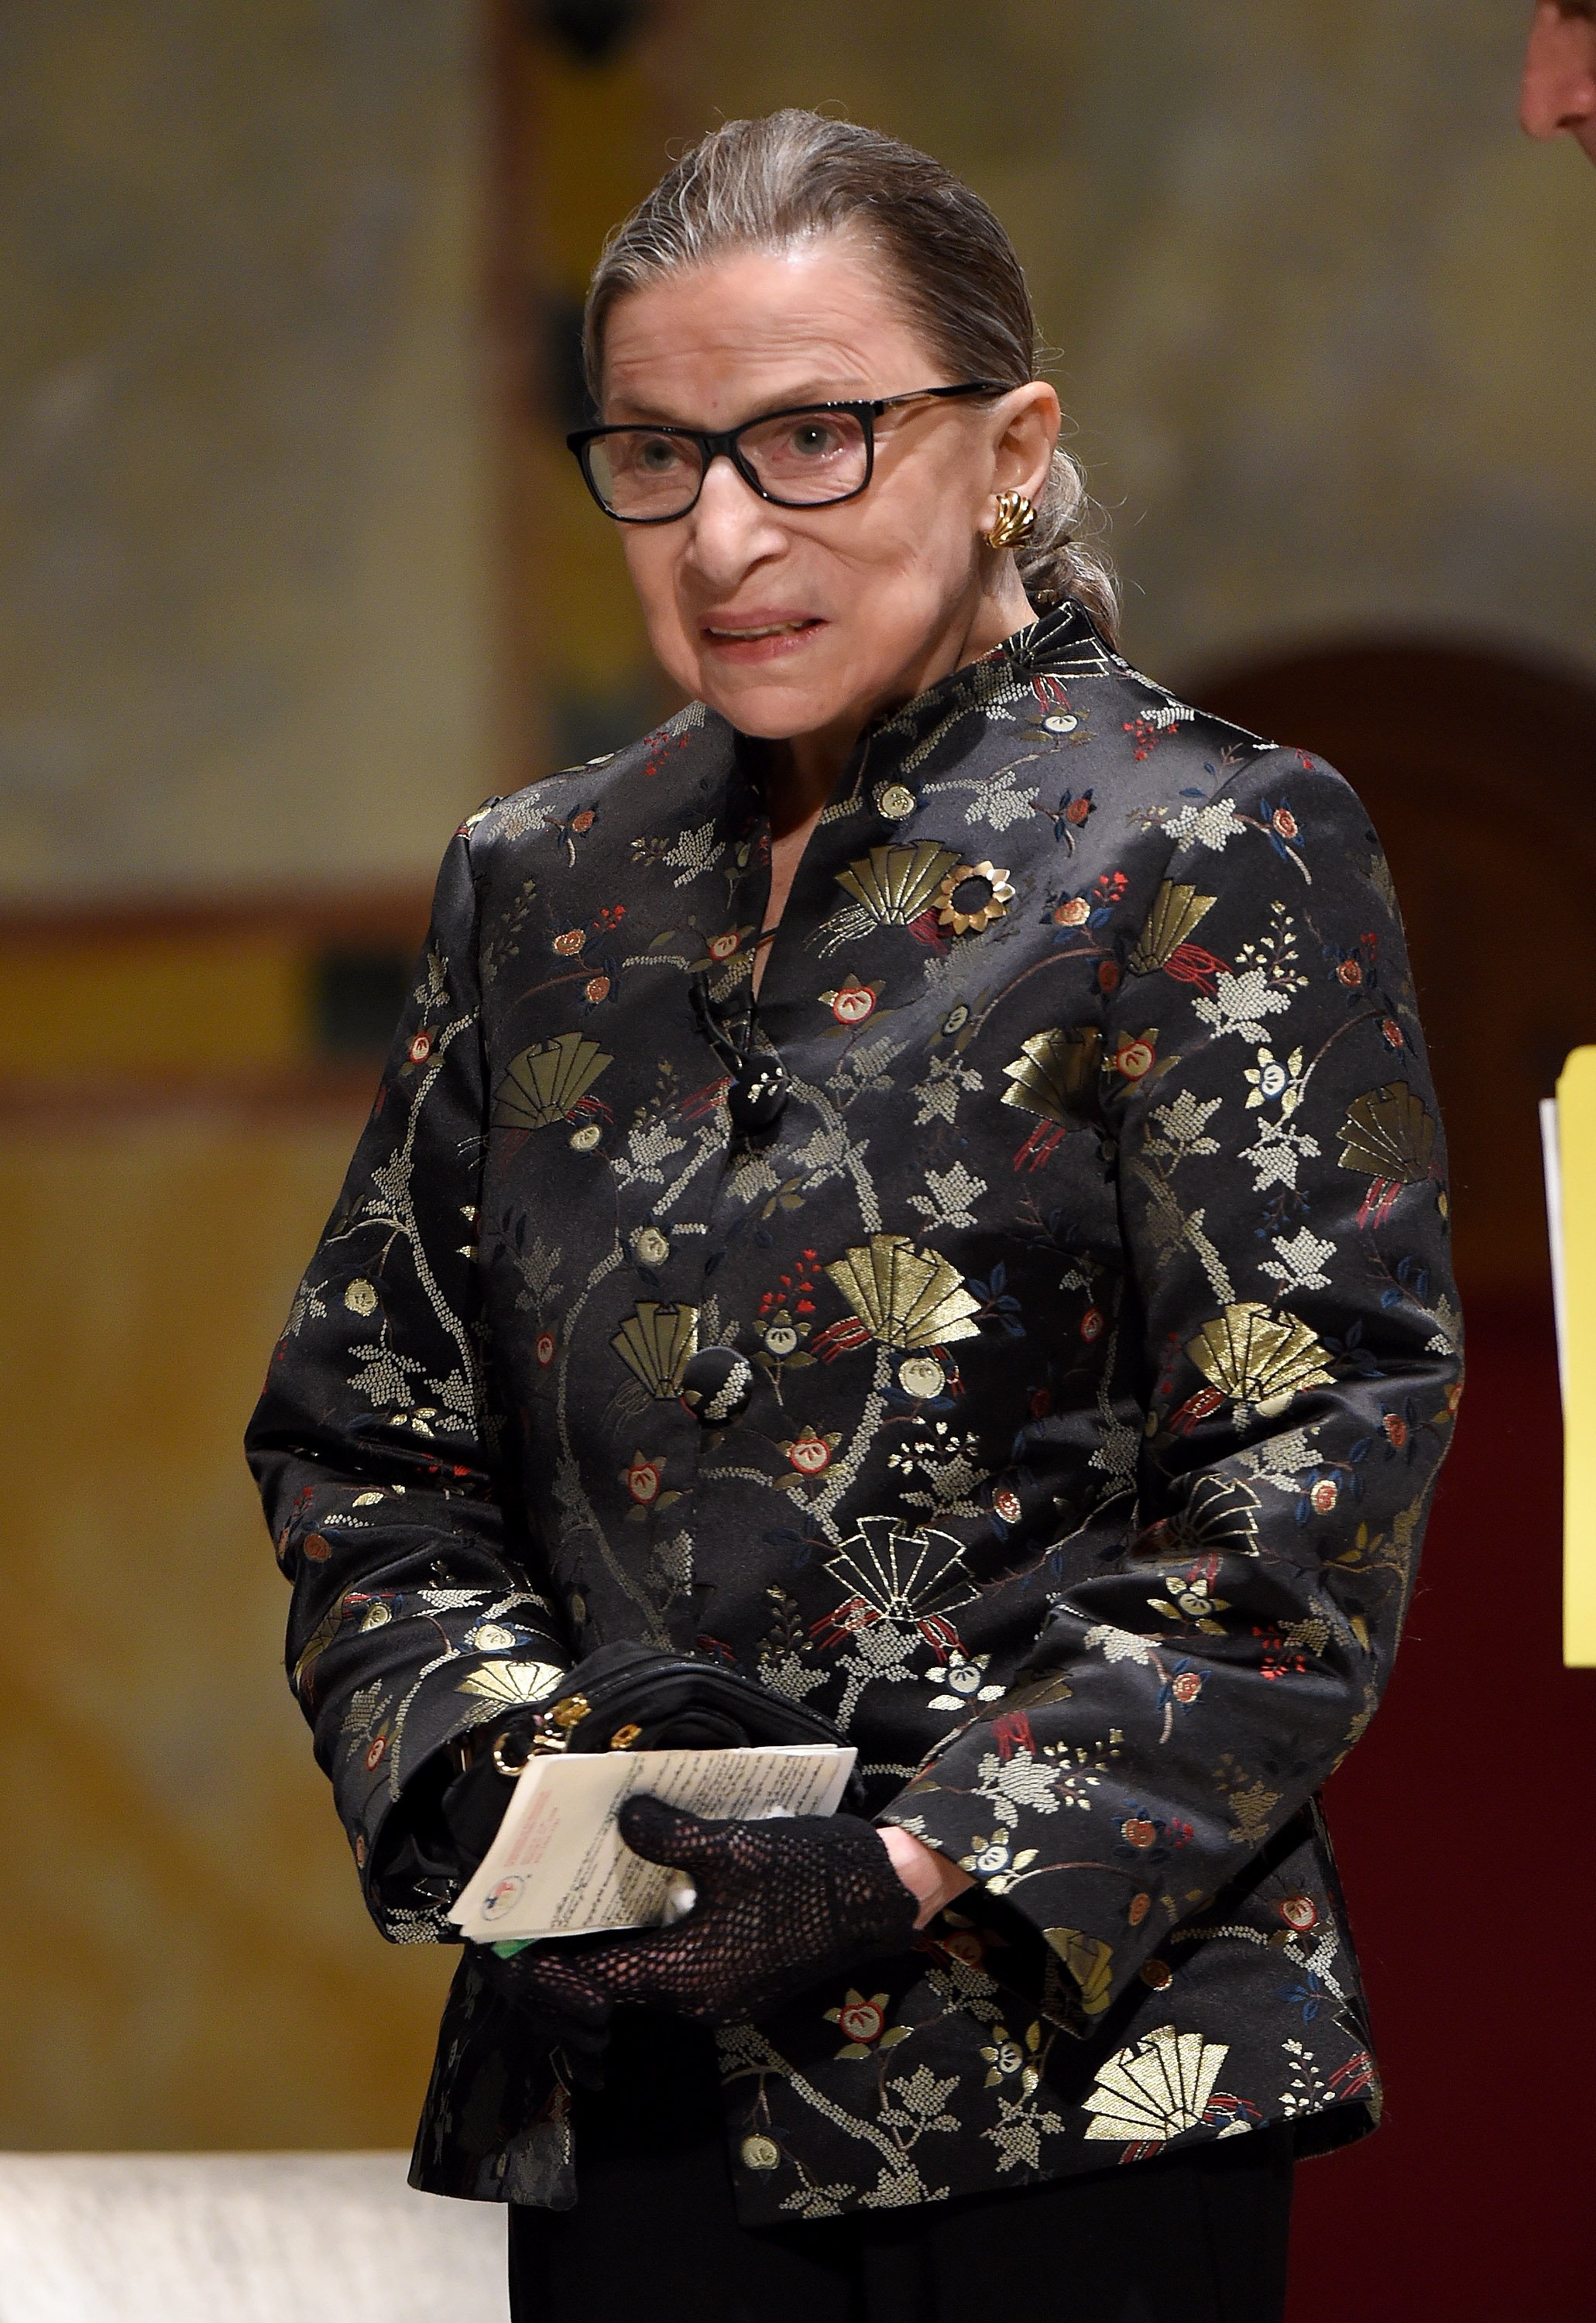 Supreme Court Justice Ruth Bader Ginsburg at the Temple Emanu-El Skirball Center on September 21, 2016, in New York City. | Source: Getty Images.